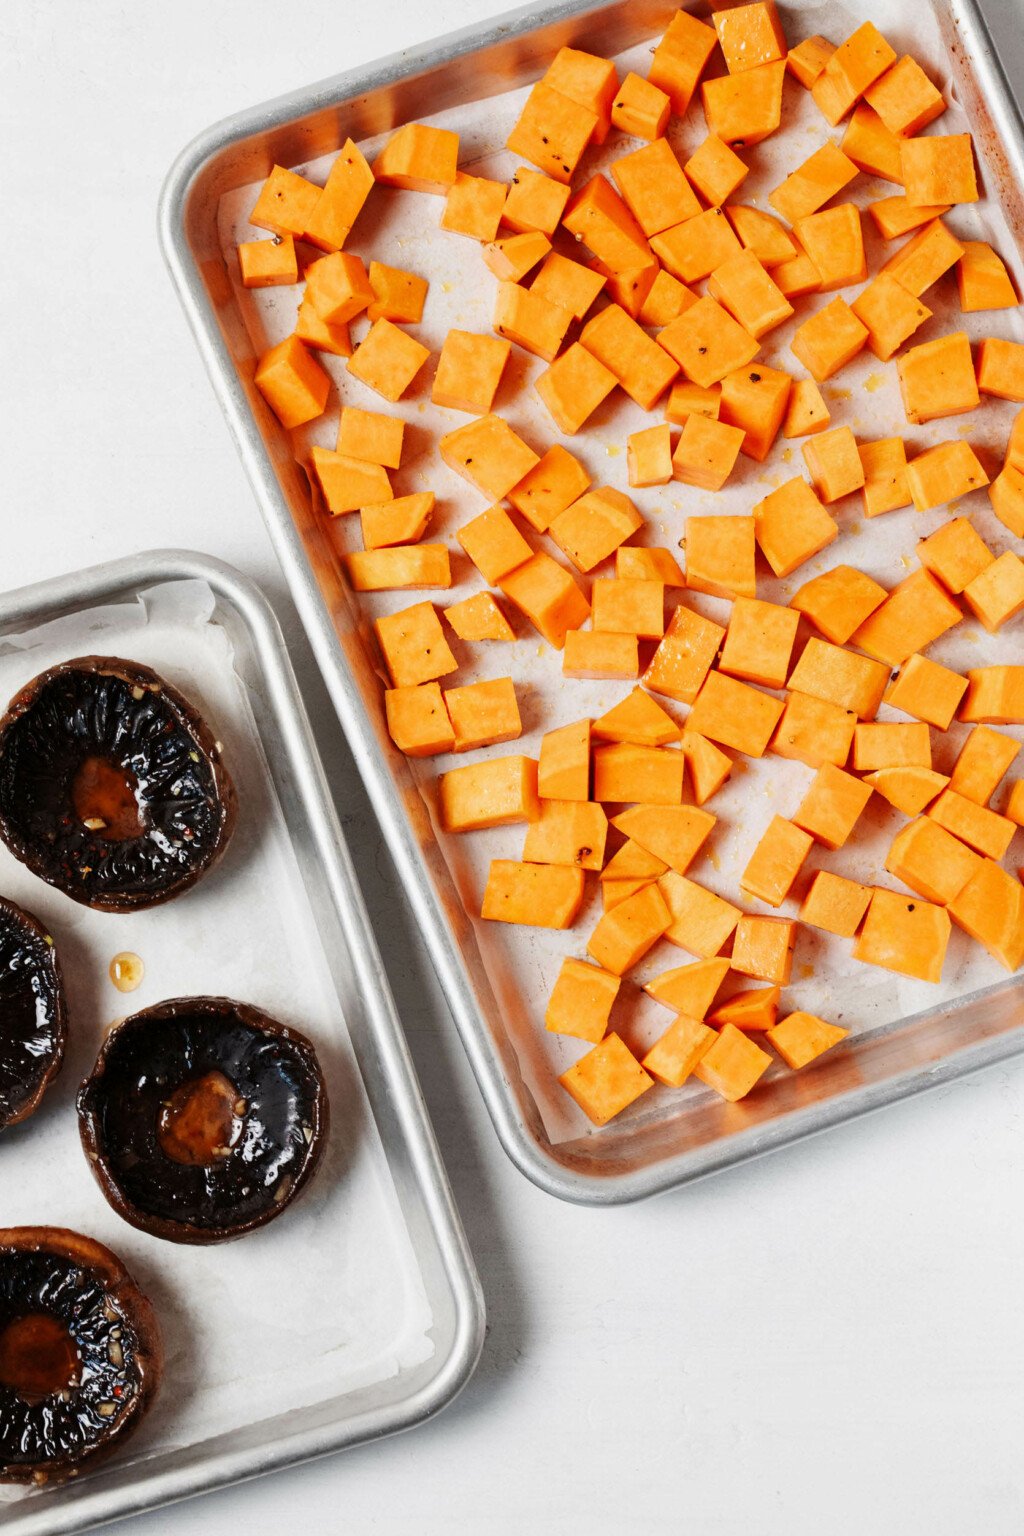 Two silver baking sheets hold portobello caps and cubed sweet potatoes for roasting.